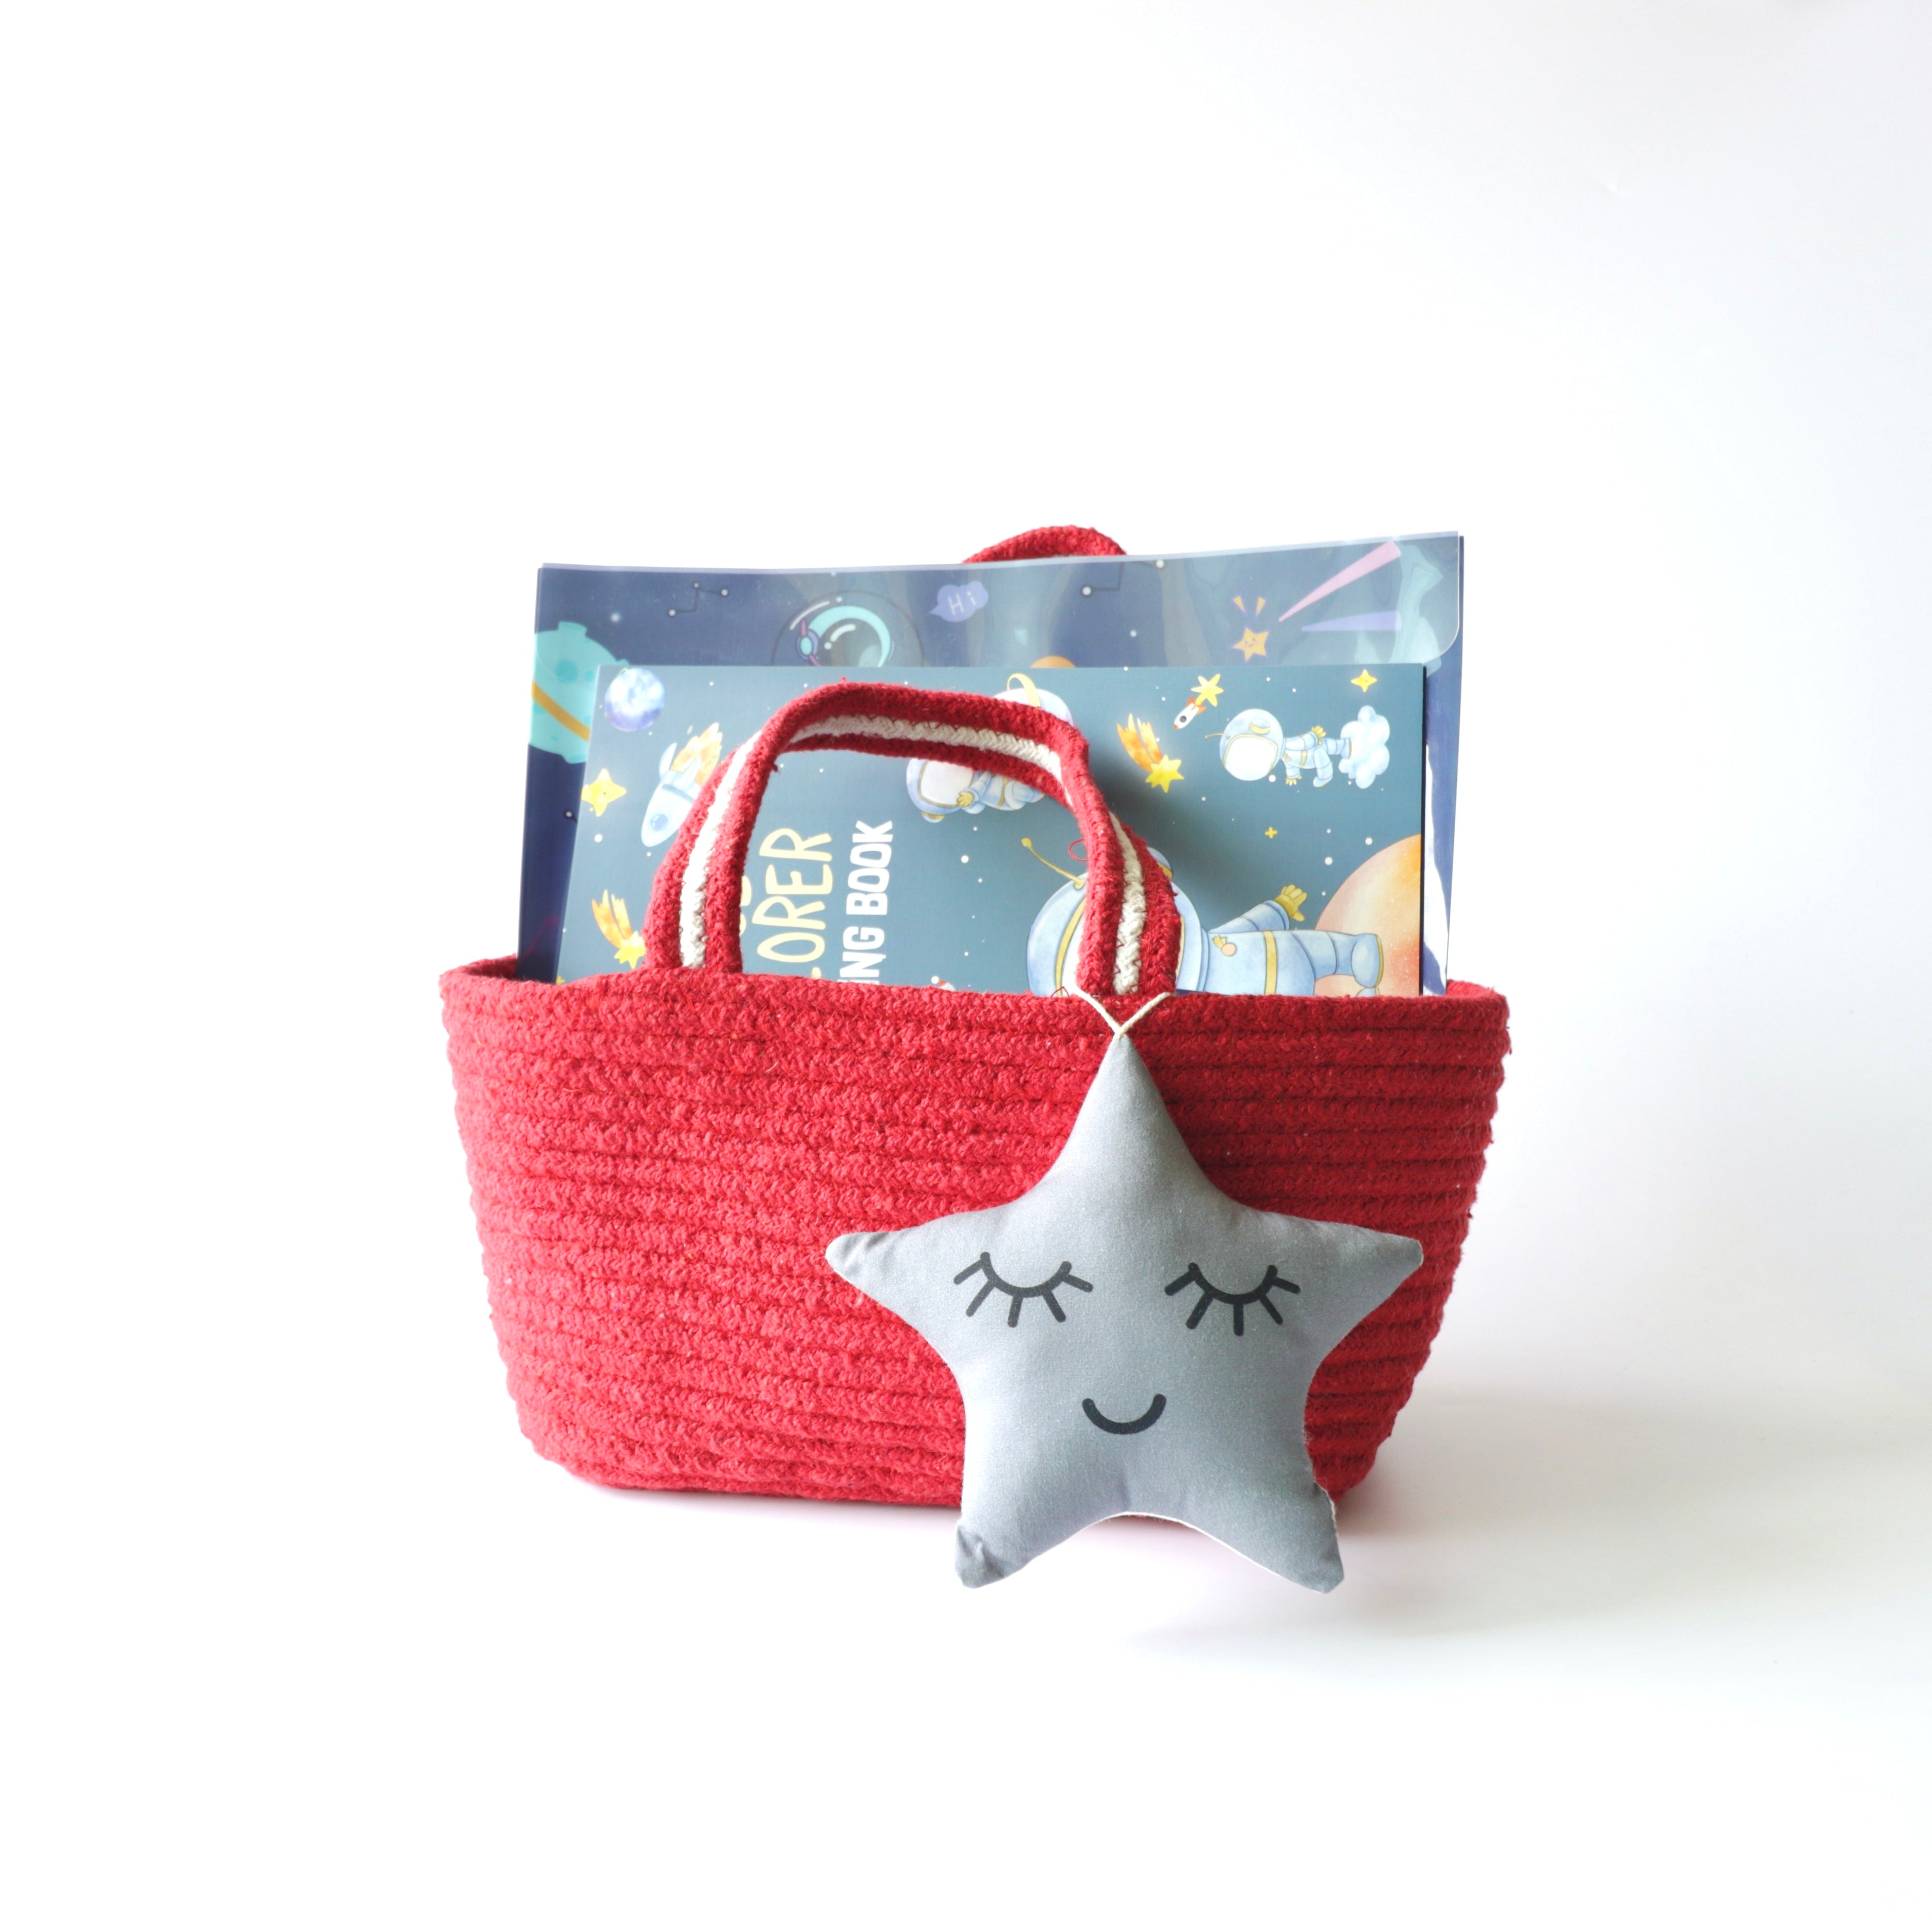 Space Gift Basket (Red)